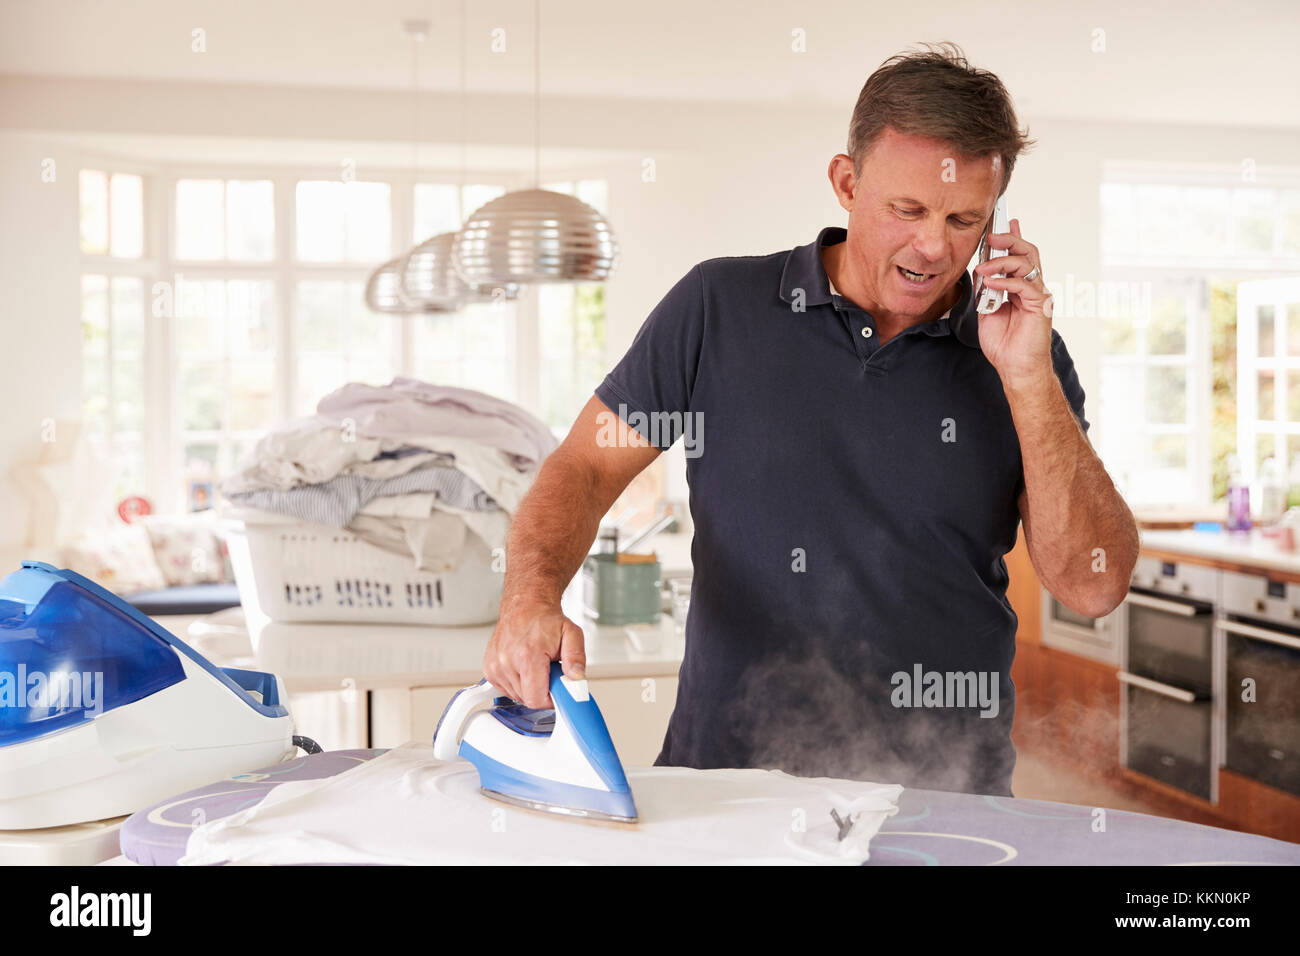 Middle aged man distracted by phone while ironing Stock Photo